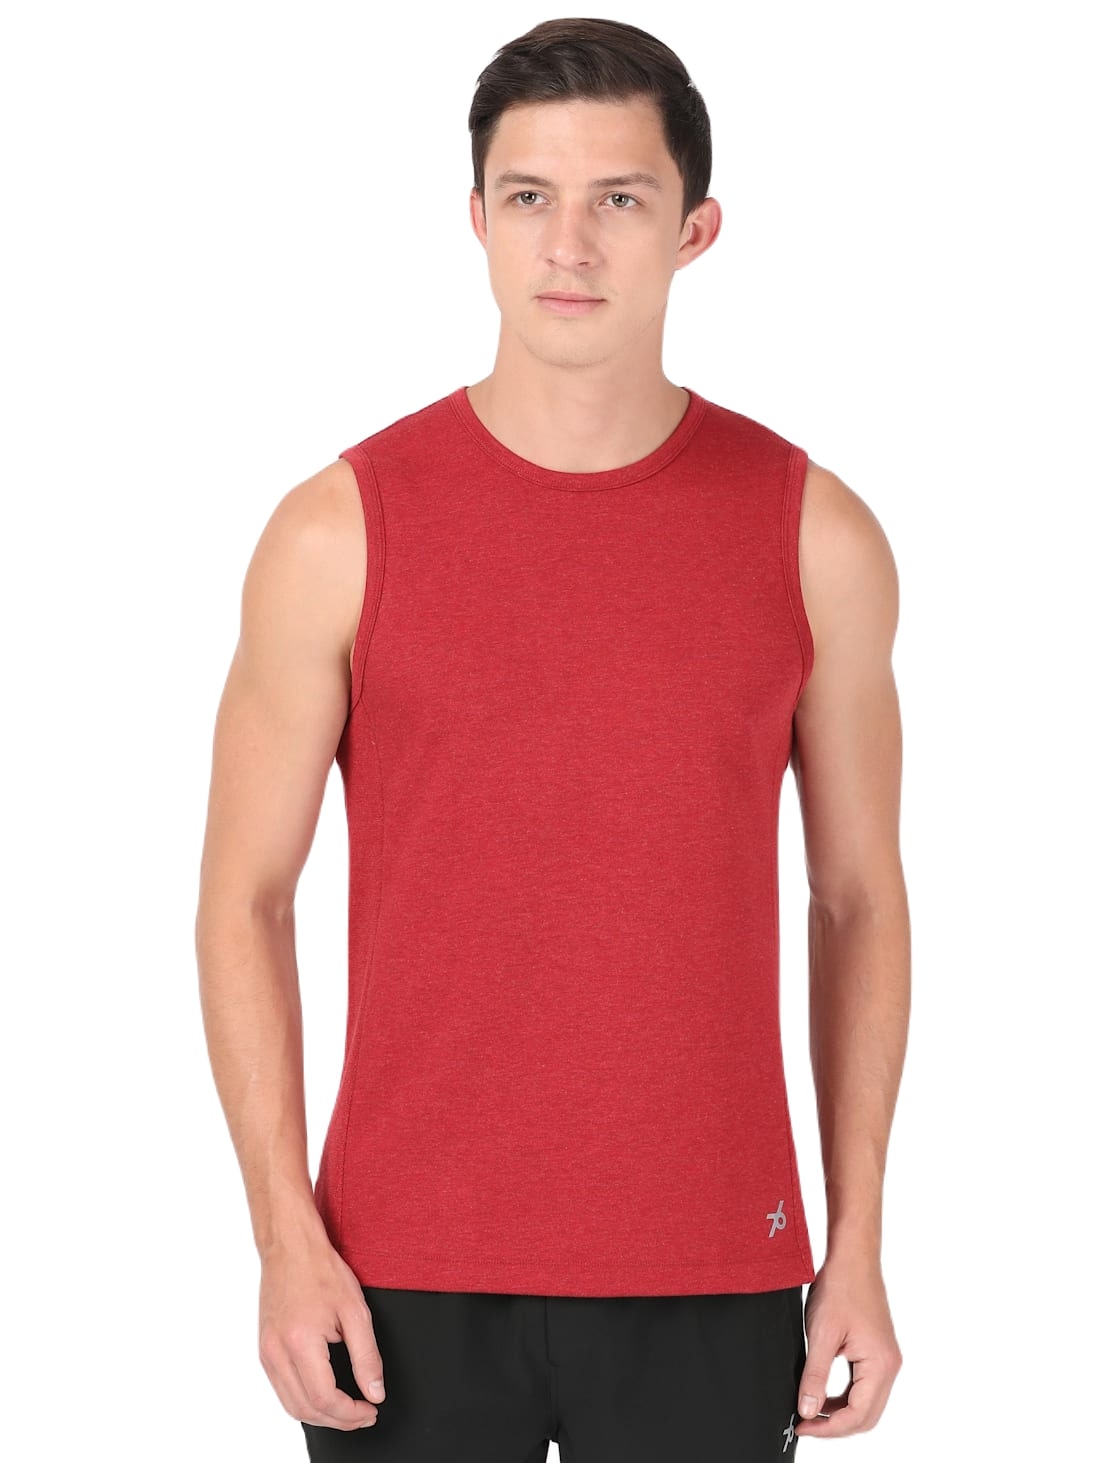 Jockey Men's Super Combed Cotton Blend Breathable Mesh Sleeveless Muscle Tee with Stay Fresh Treatment